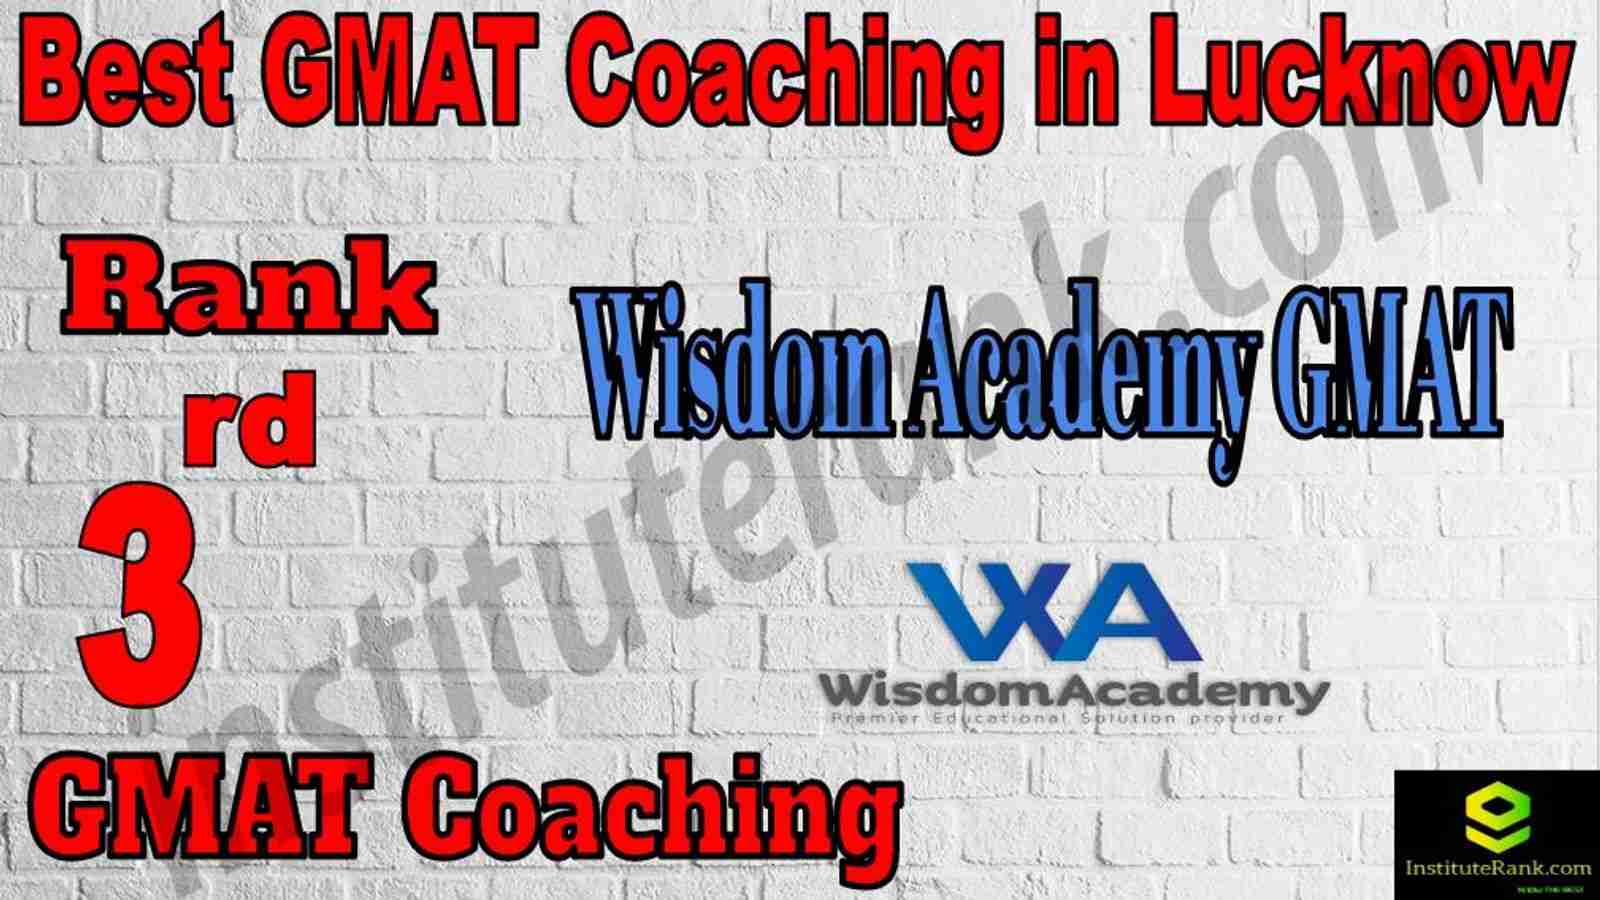 3rd Best GMAT Coaching in Lucknow